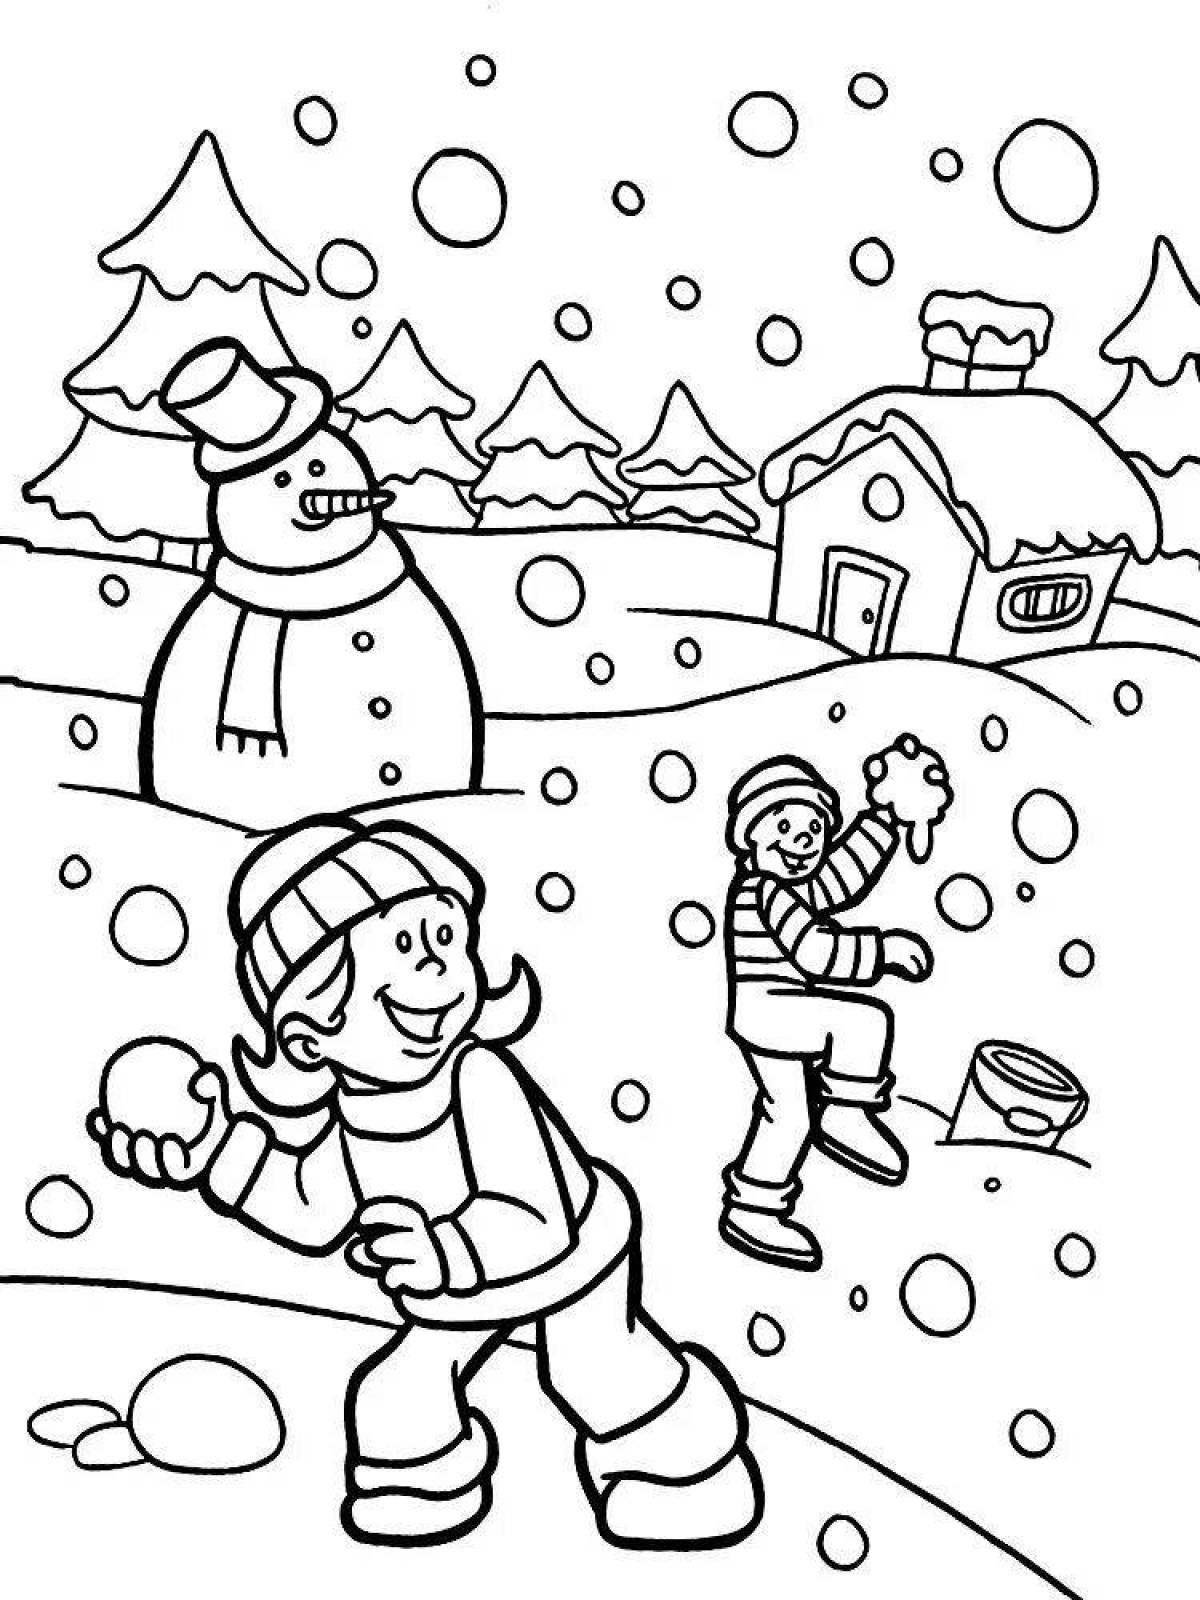 Magic winter coloring for kids